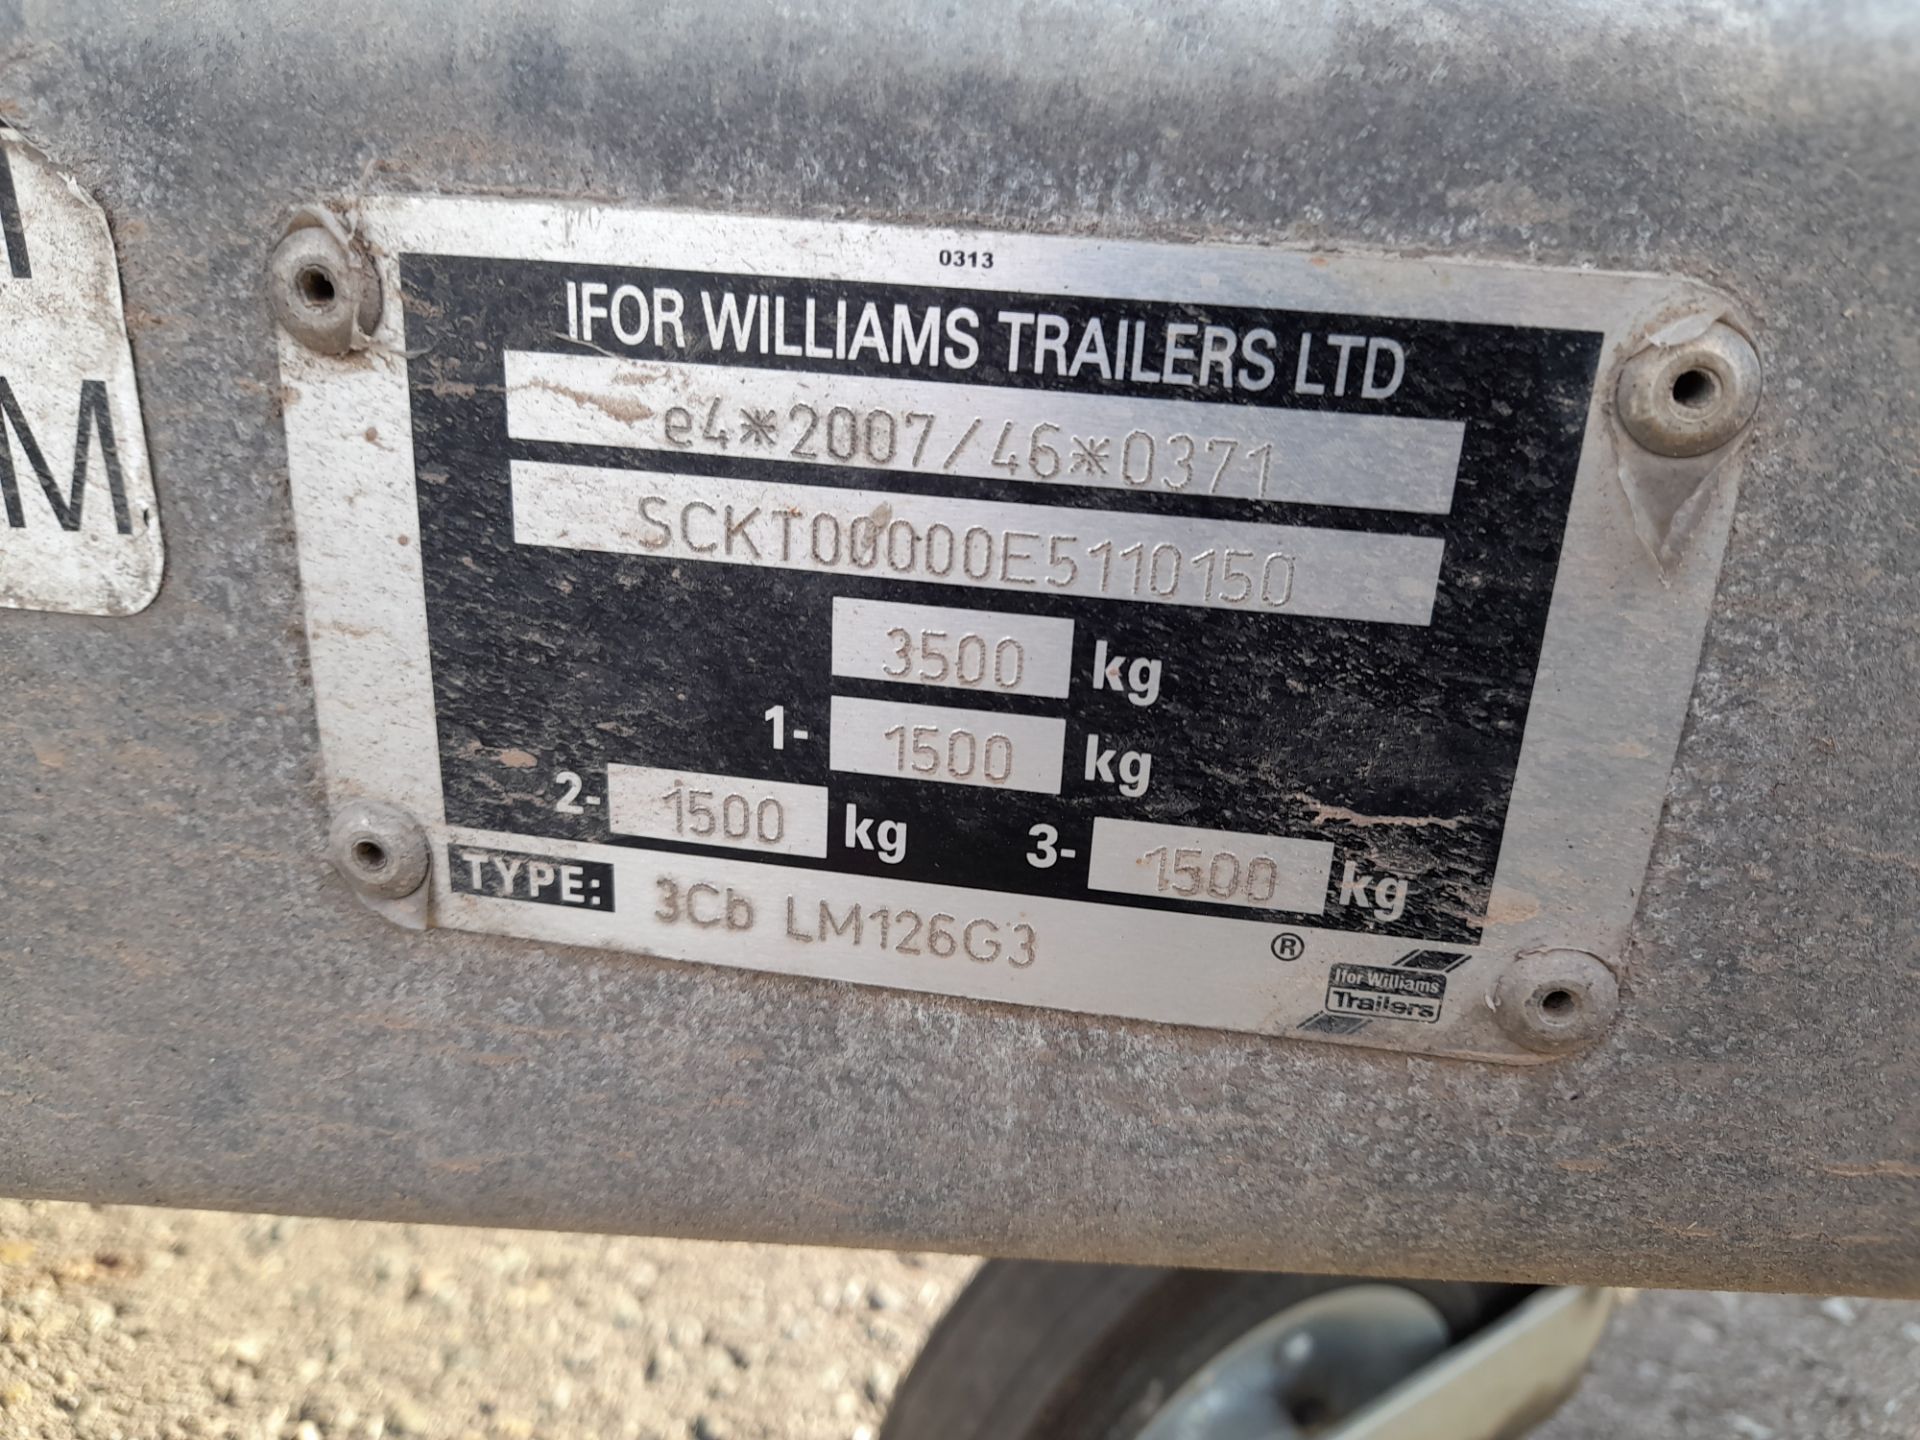 Ifor Williams e4*2007/46*0371 SCKT00000E5110150 Type 3Cb LM126G3 Tri axle trailer (Approx. 12ft x - Image 6 of 25